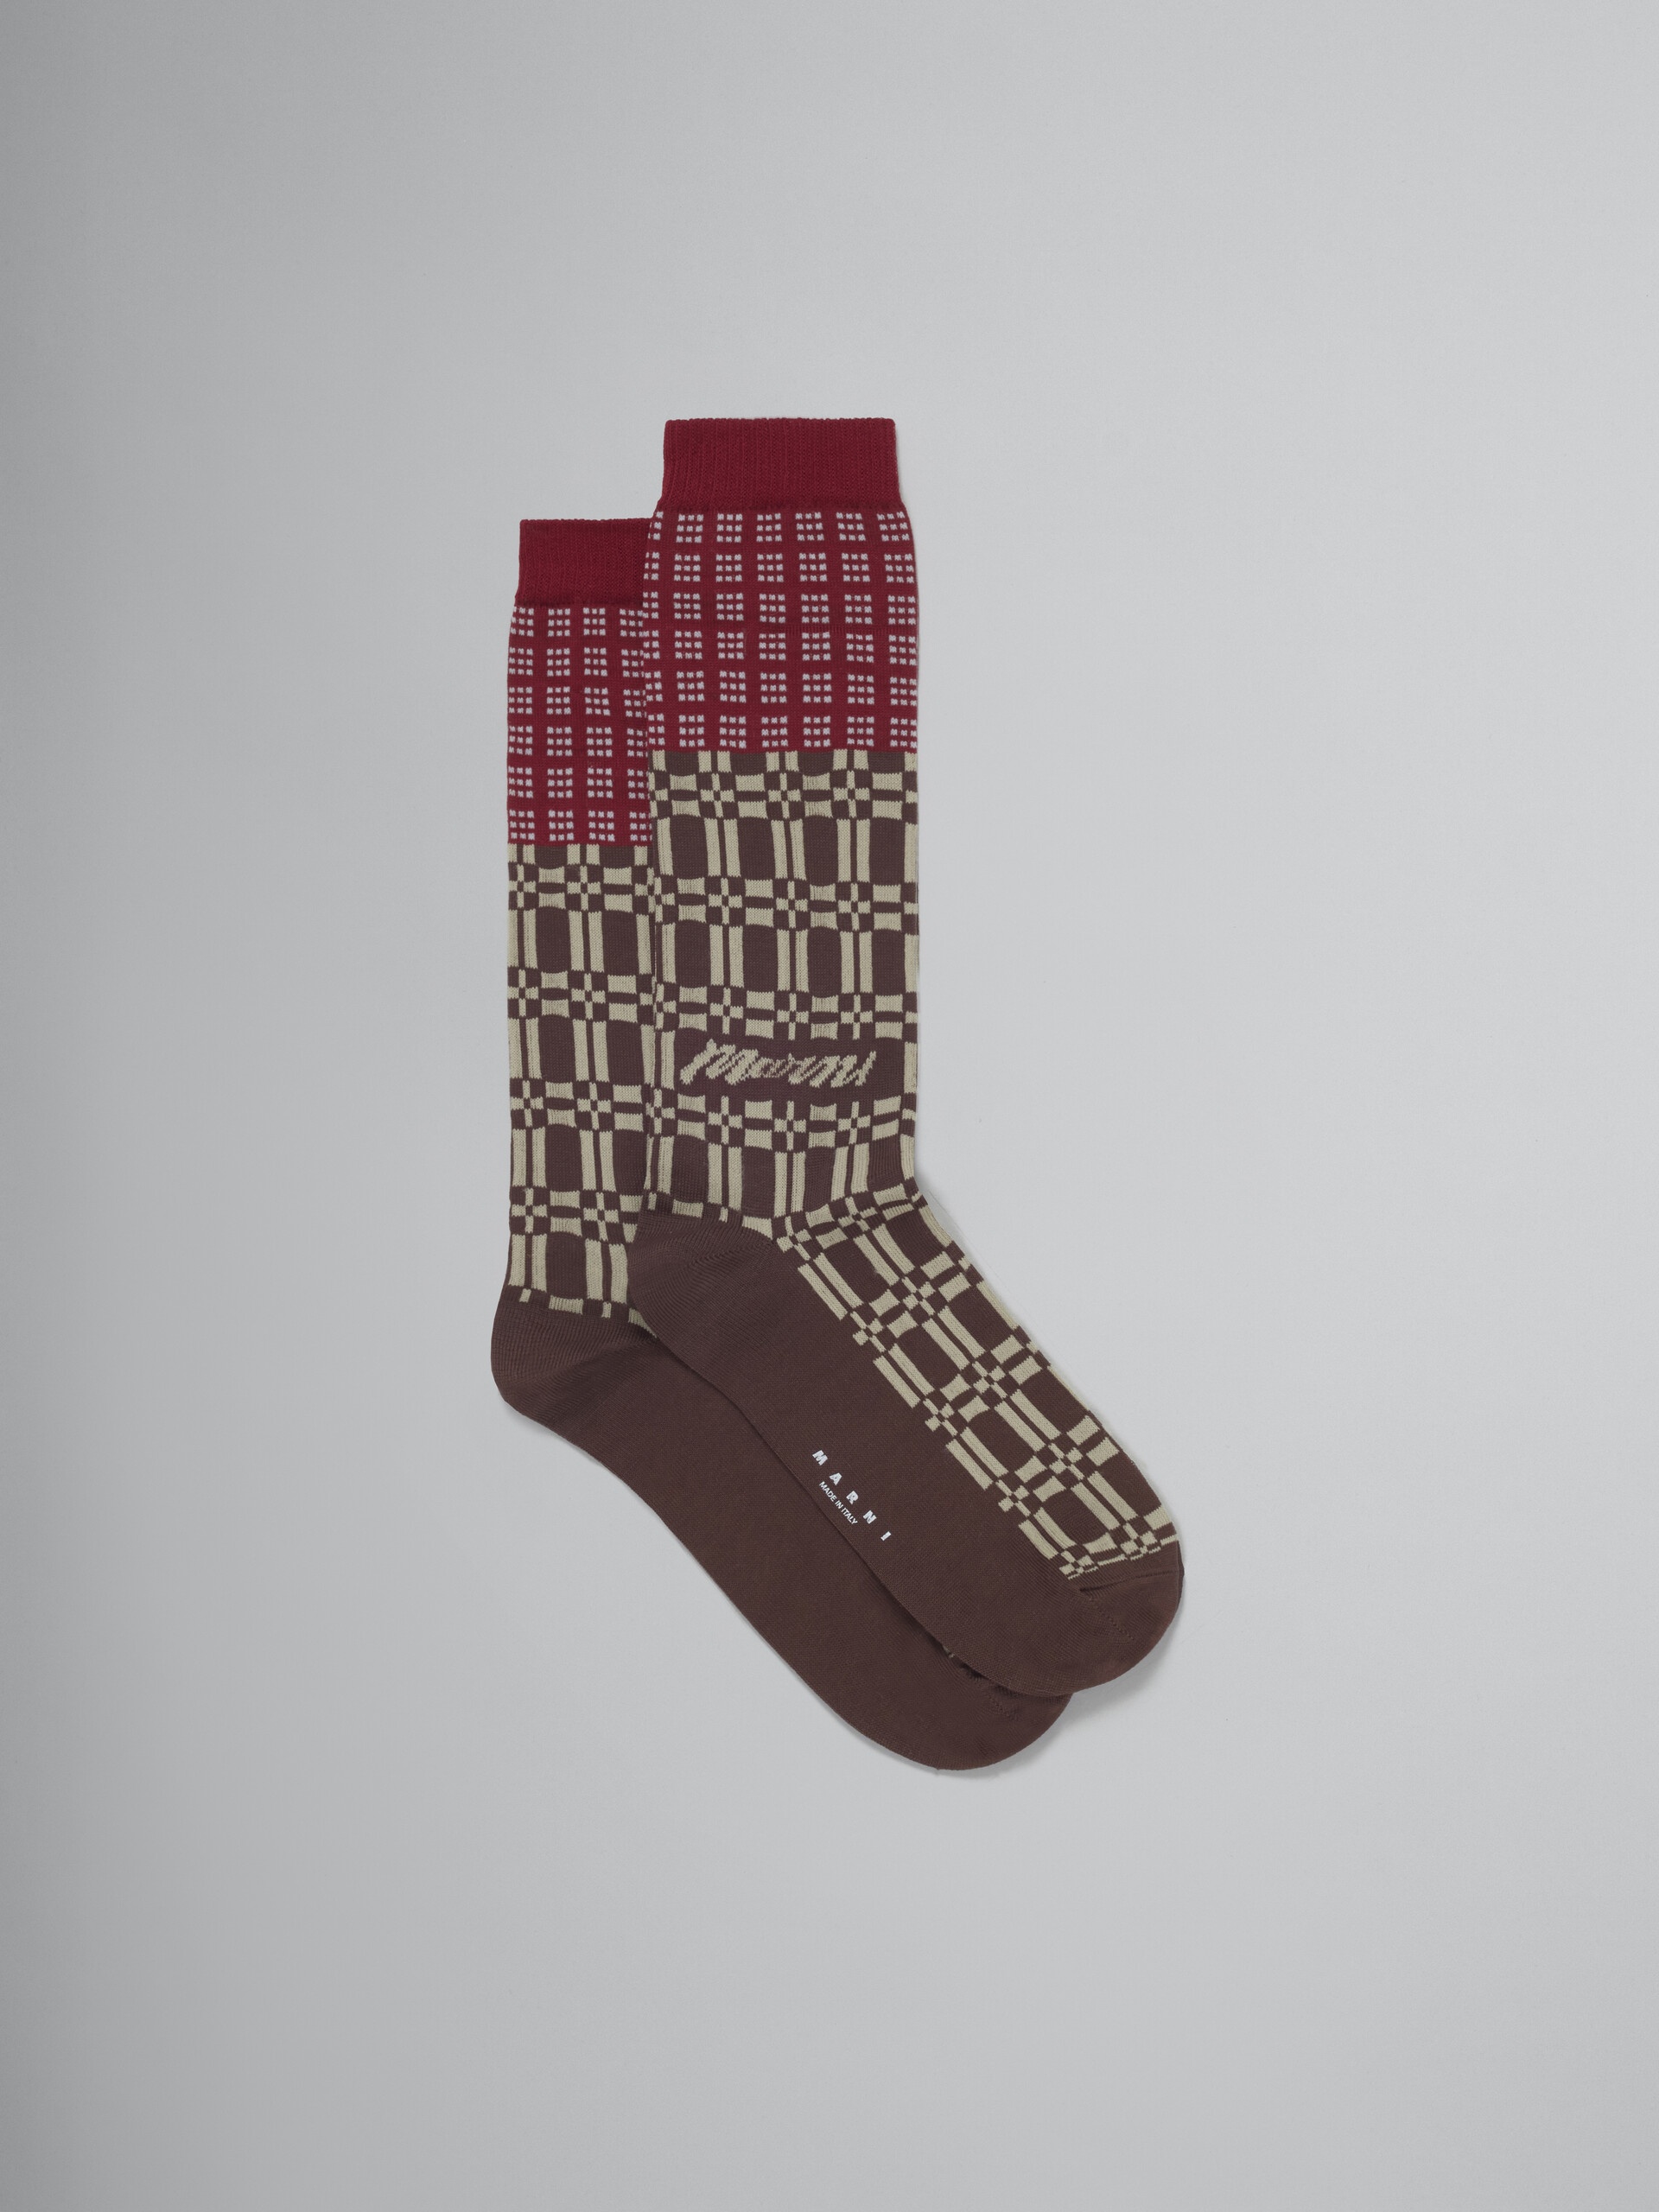 RED SOCKS WITH GEOMETRIC PATTERNS - 1